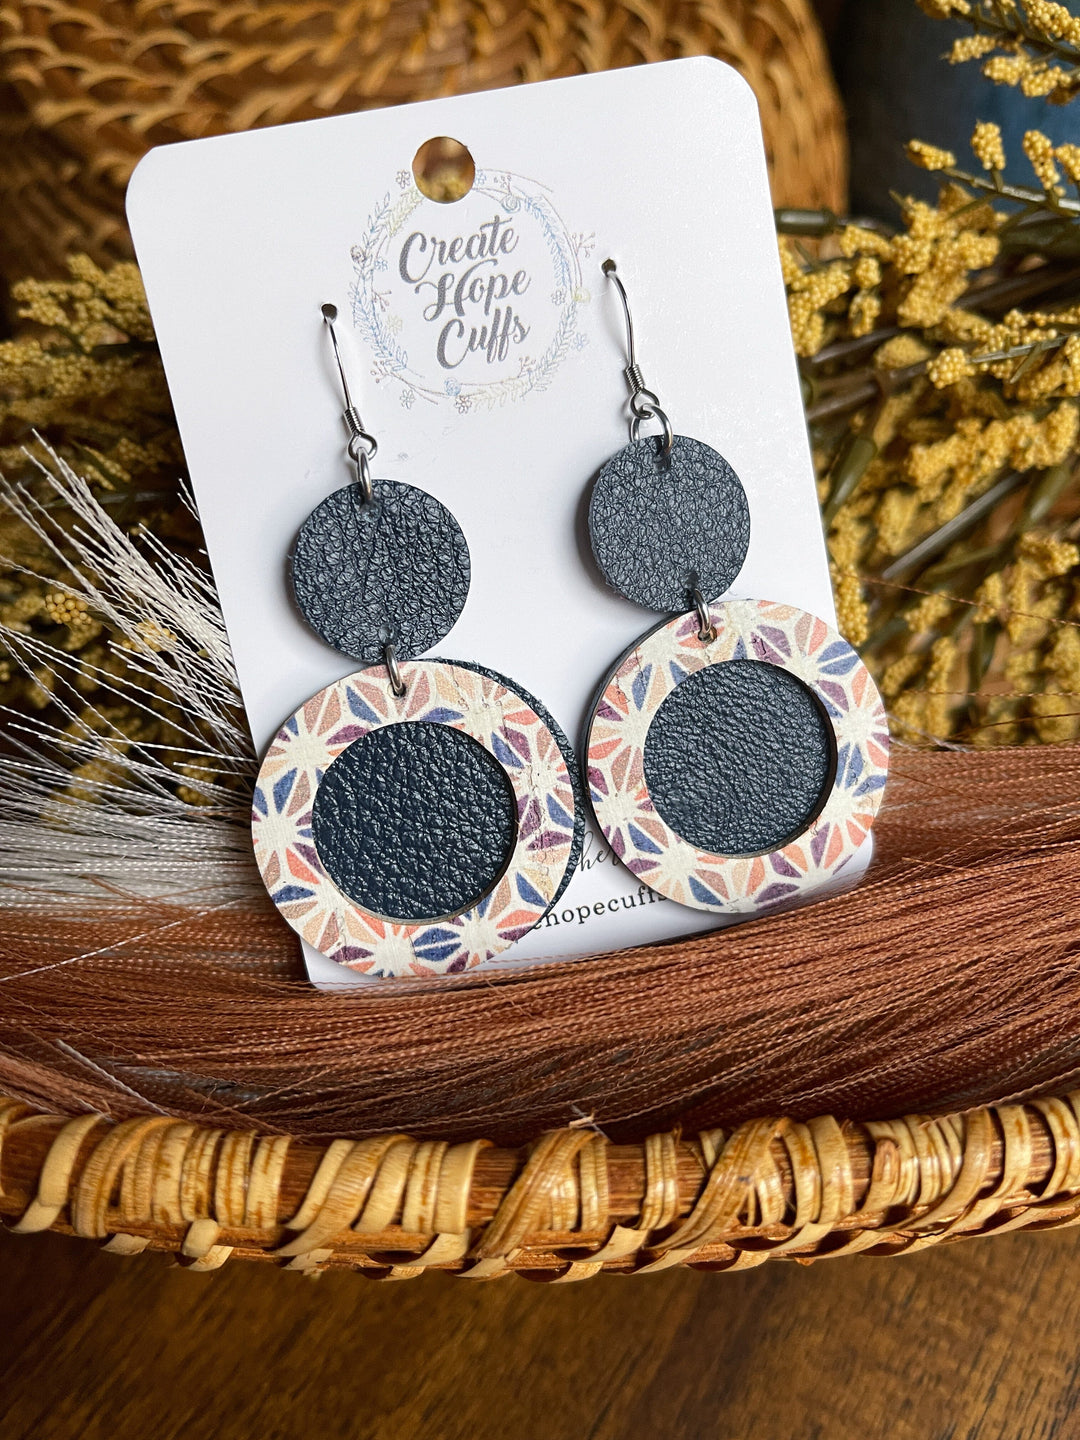 Cracked Abstract Navy | 2 Styles | Circle Leather Earrings | Hypoallergenic | Women Leather Earrings Create Hope Cuffs 